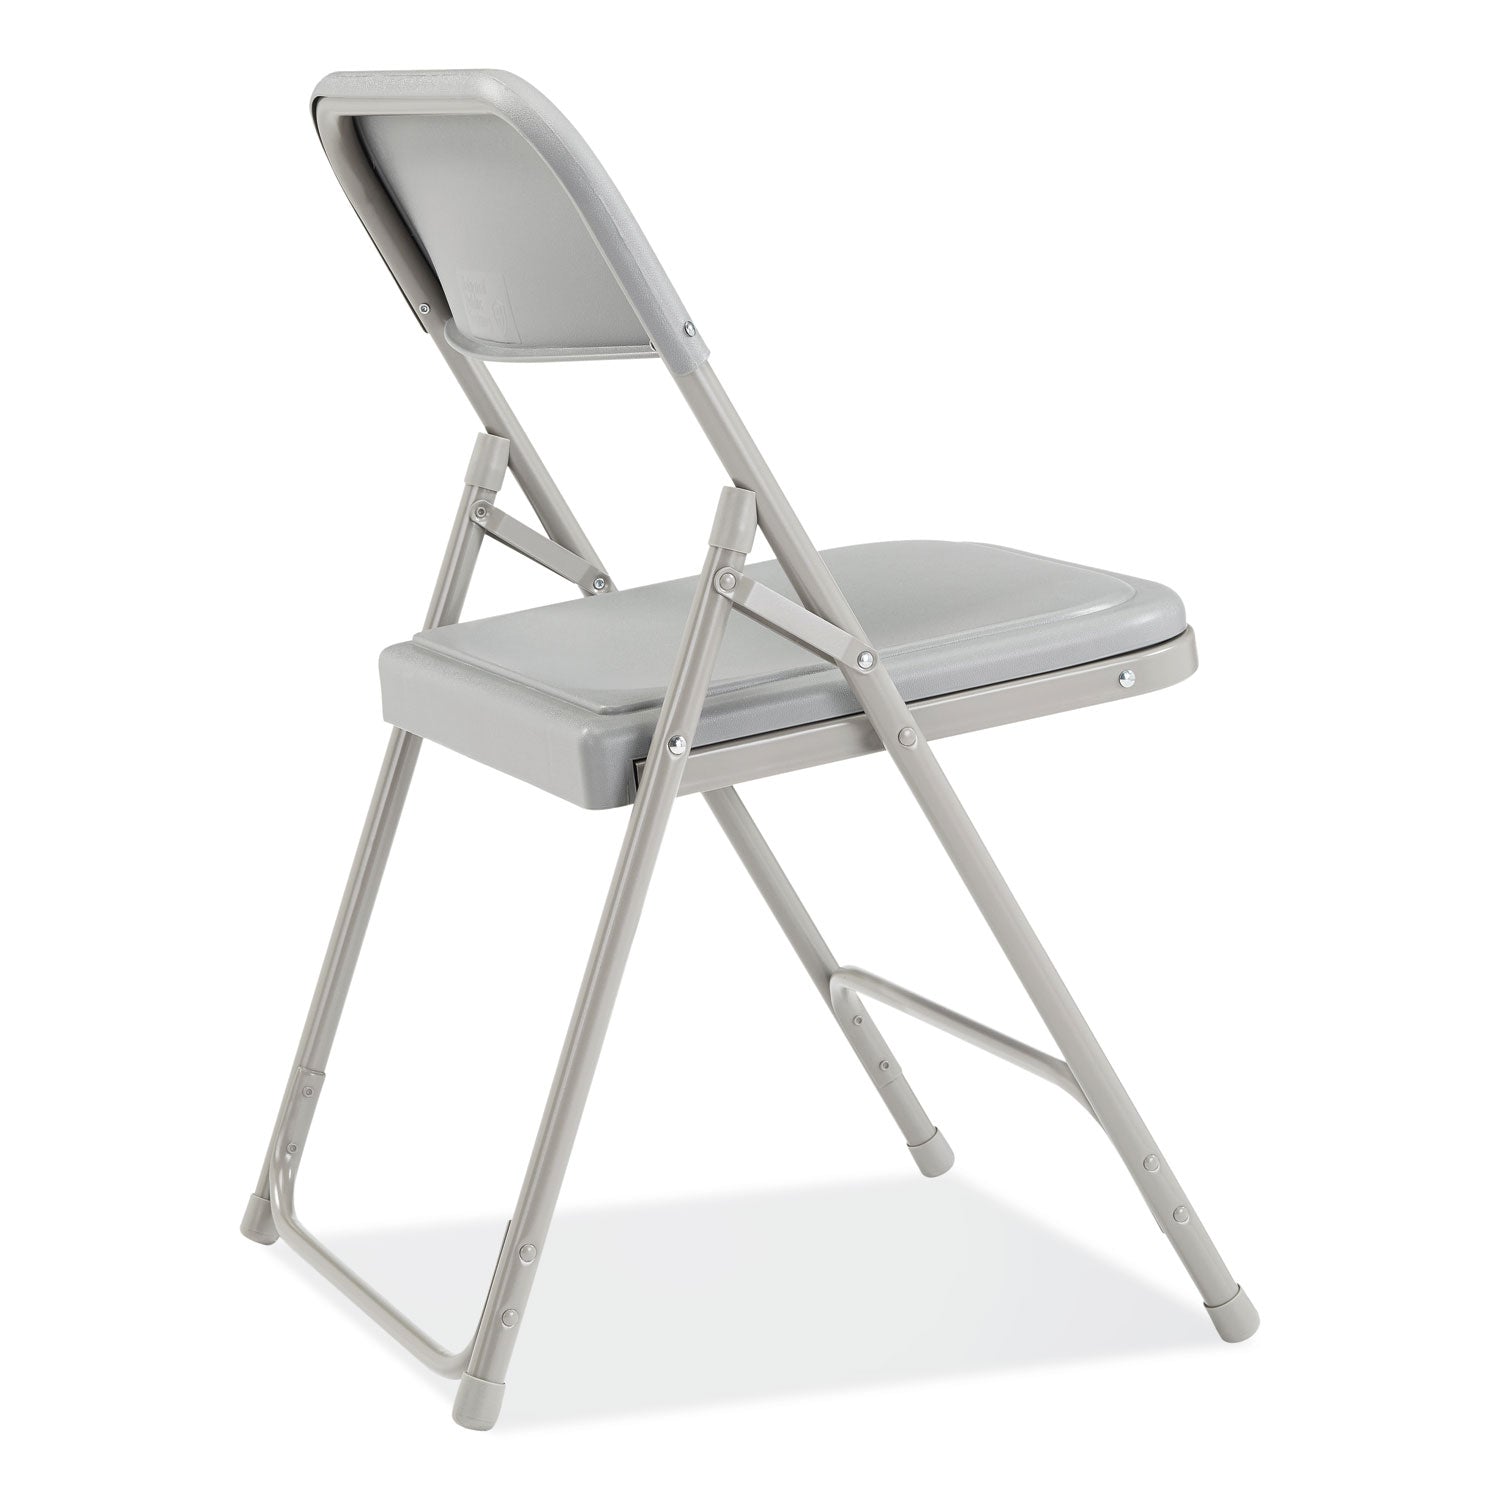 800-series-premium-plastic-folding-chair-supports-500-lb-18-seat-ht-gray-seat-back-gray-base-4-ctships-in-1-3-bus-days_nps802 - 4